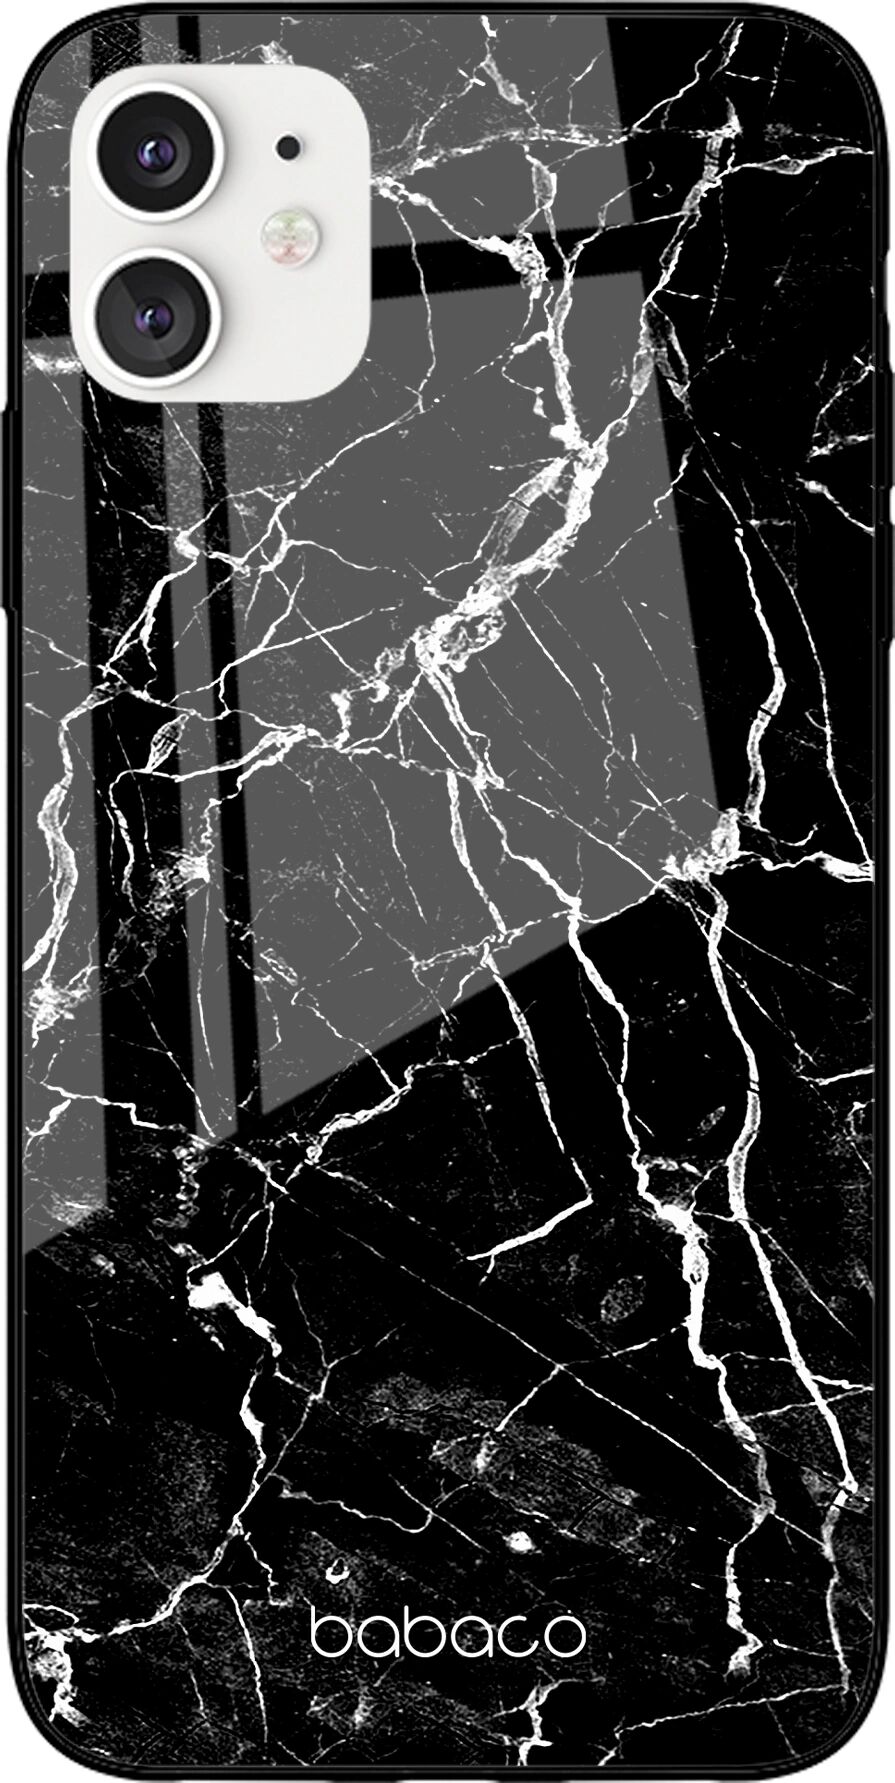 Babaco Ochranný kryt pro iPhone 11 - Babaco, Premium Abstract 034